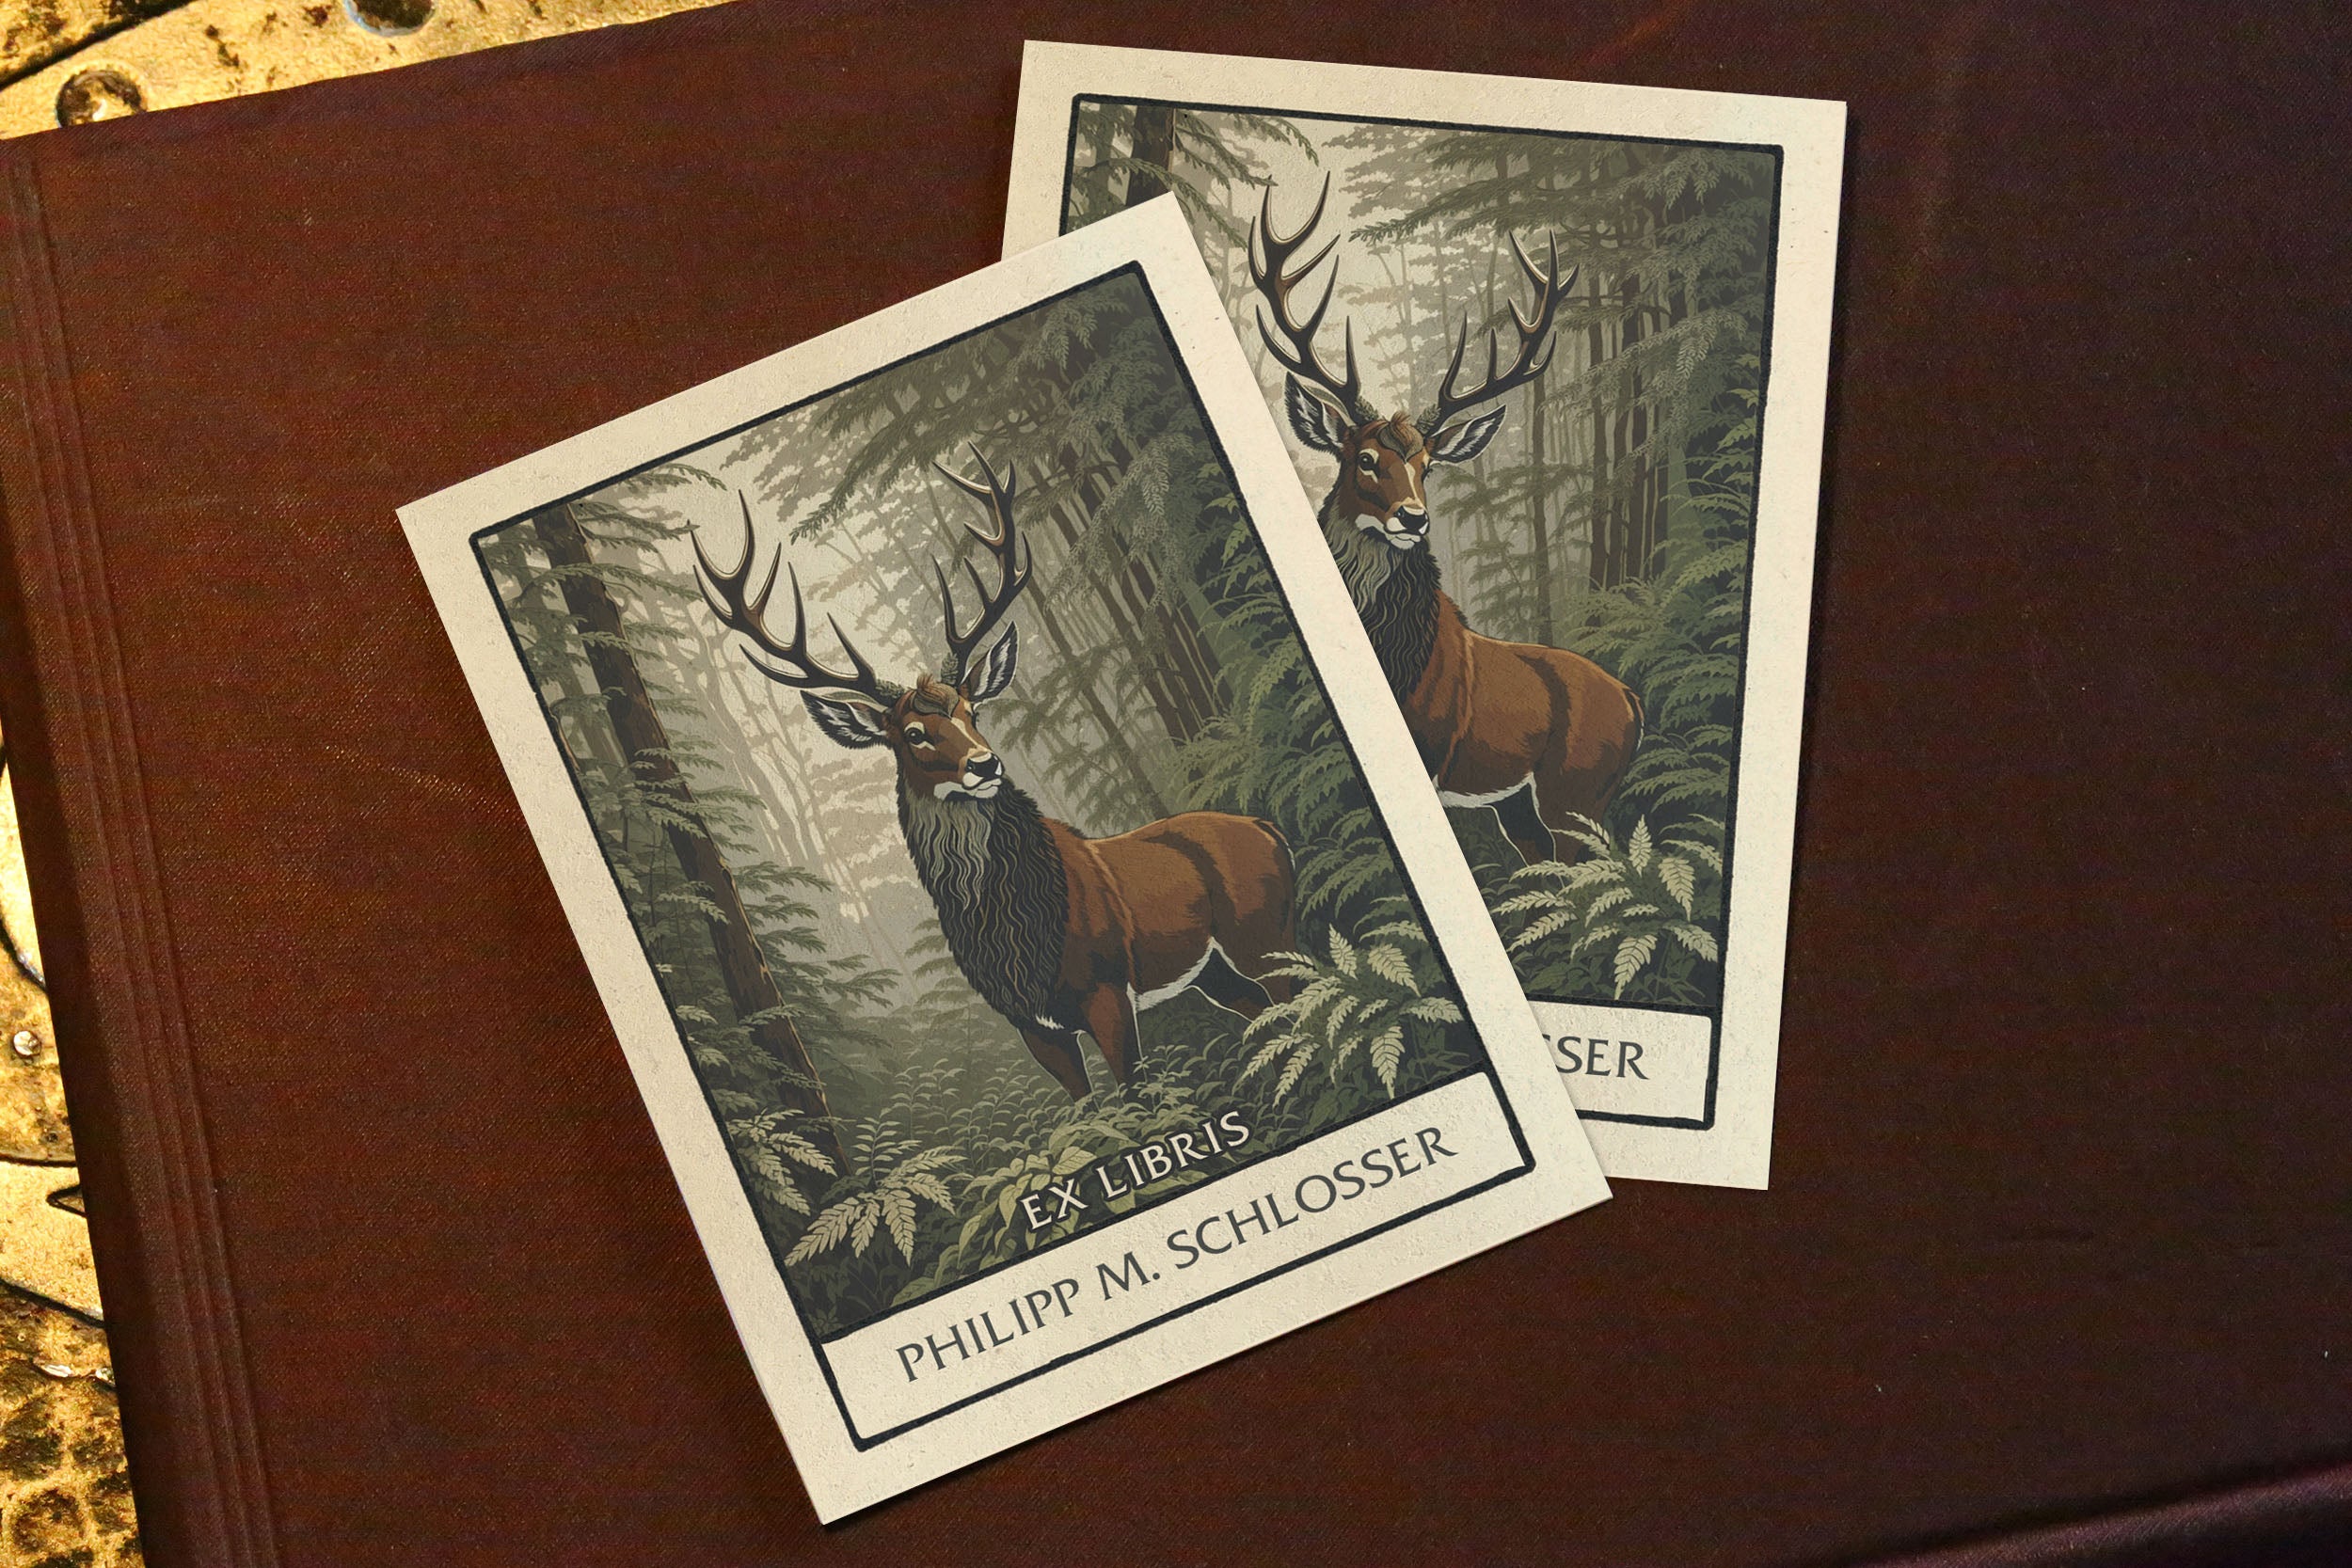 Stag Sovereign, Personalized Art Deco Ex-Libris Bookplates, Crafted on Traditional Gummed Paper, 3in x 4in, Set of 30